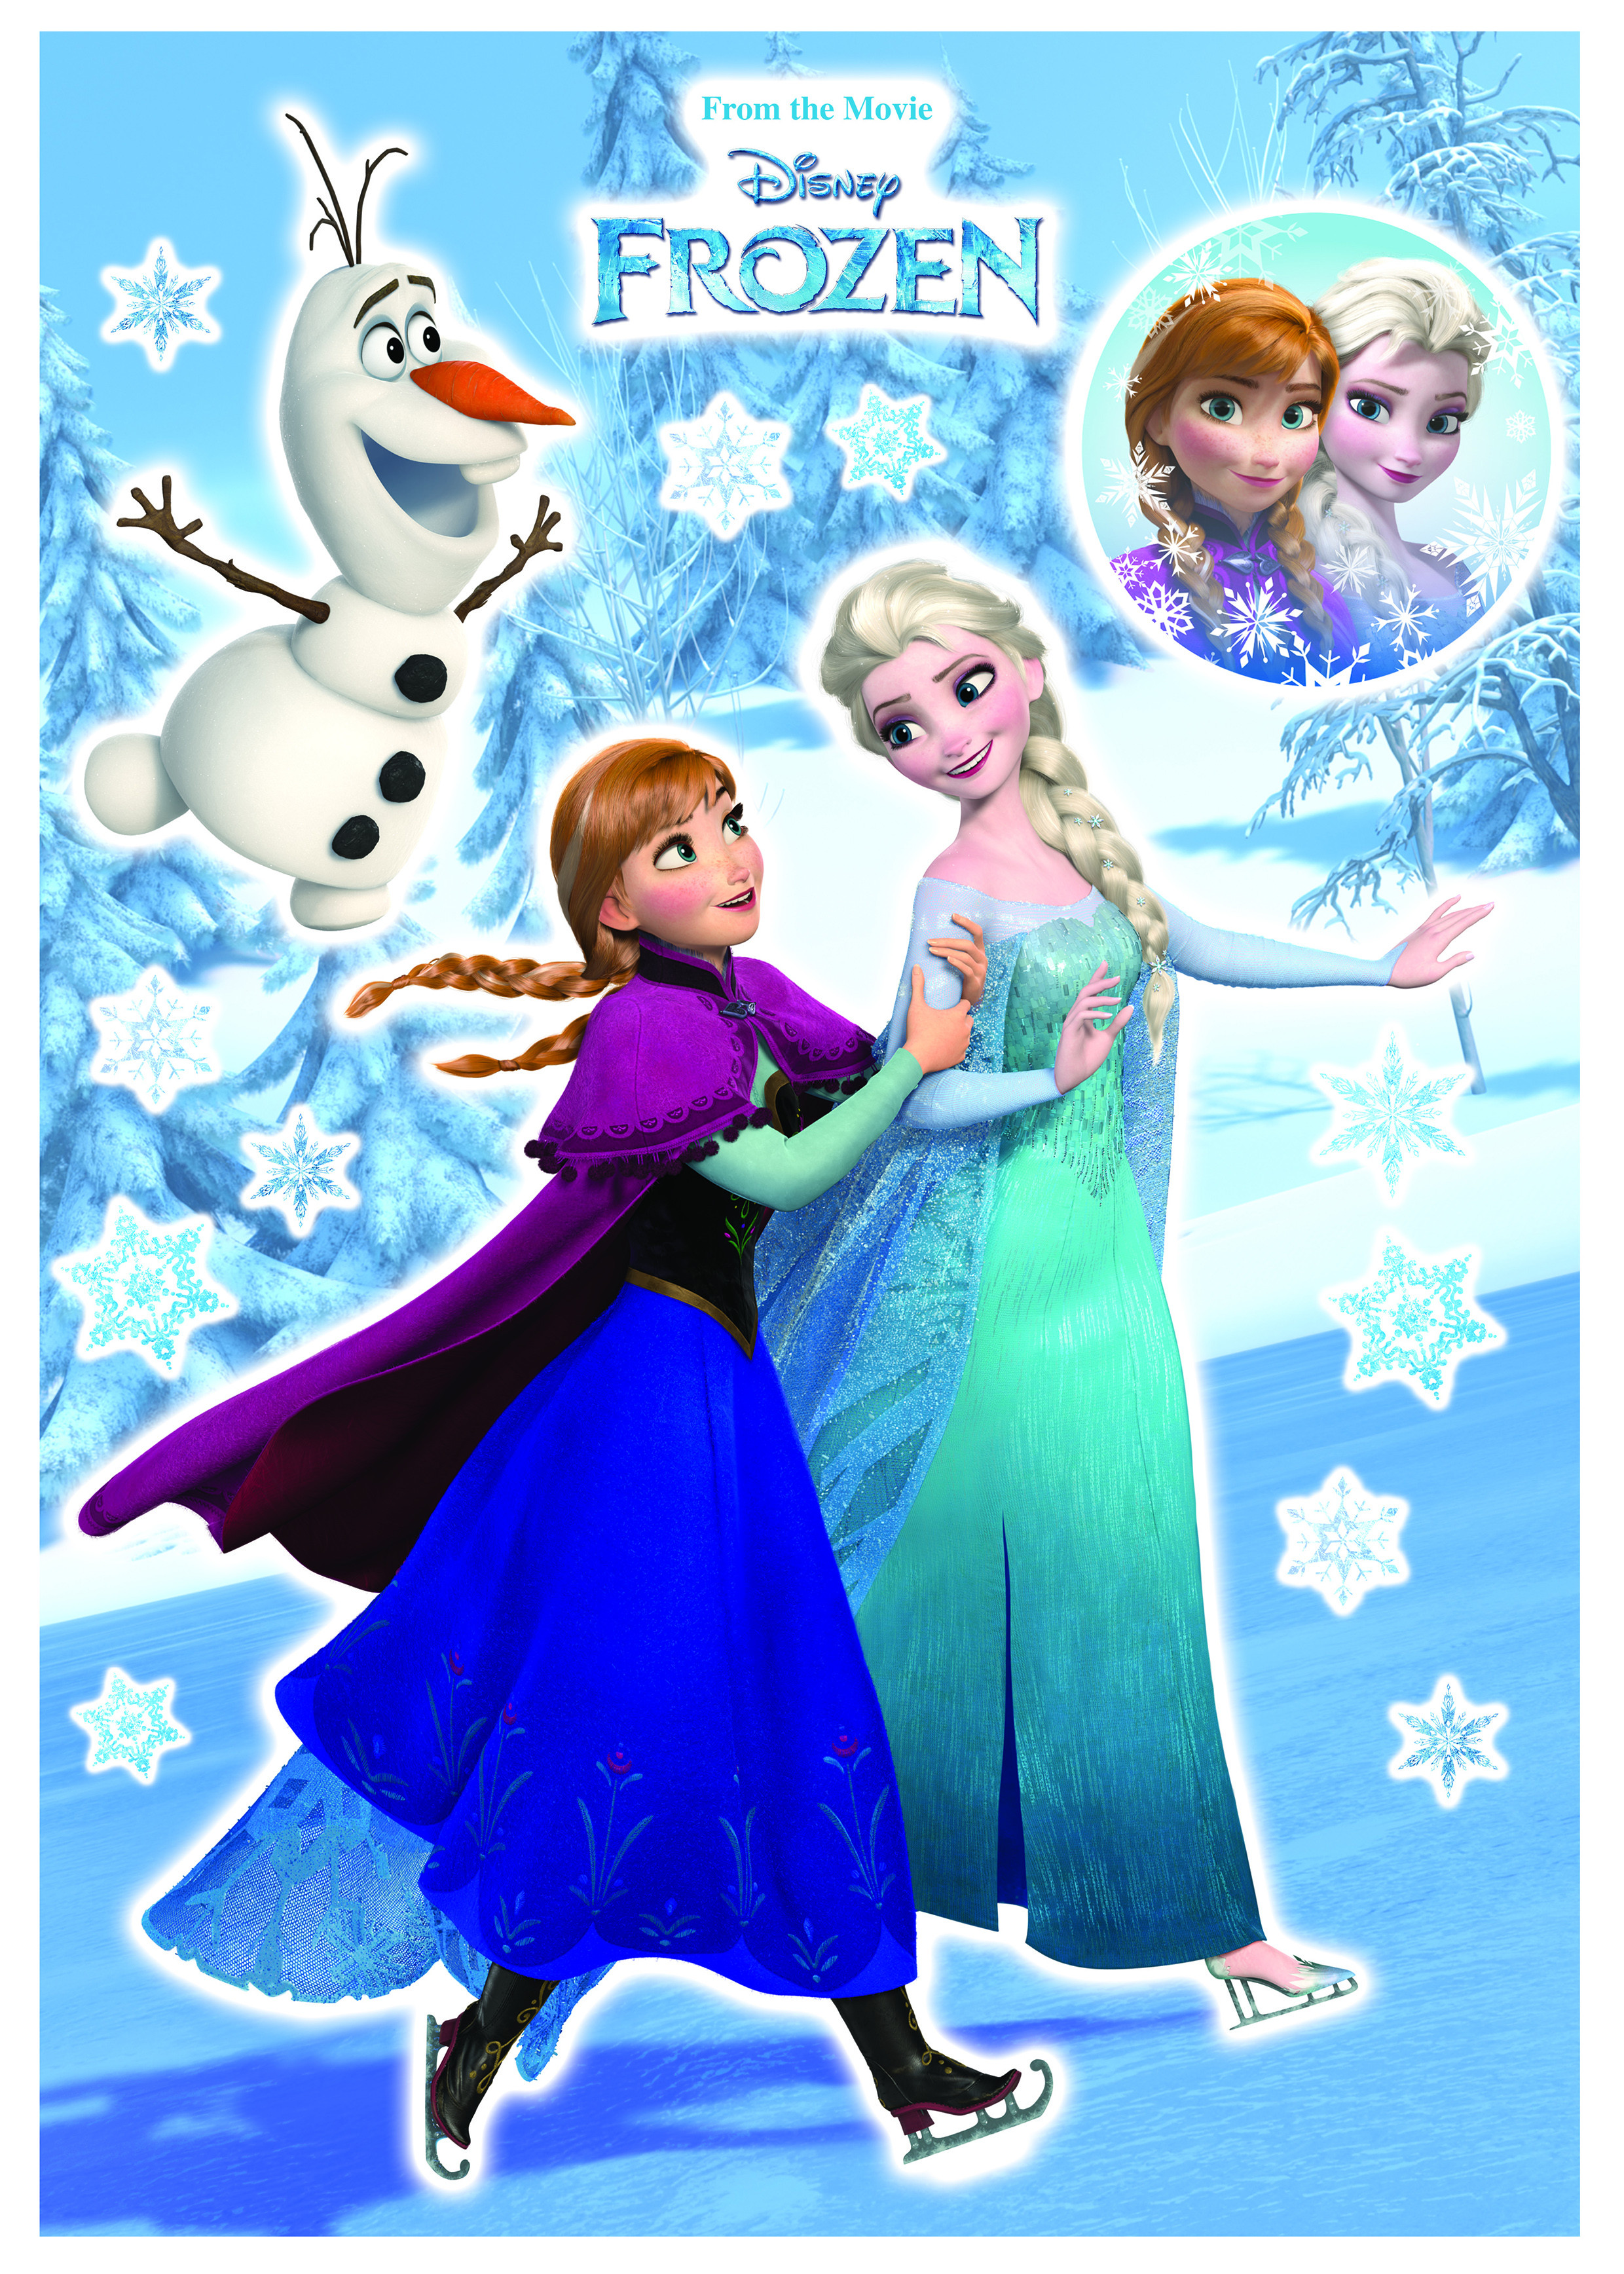 anand soundarapandian add photo show me pictures of anna and elsa